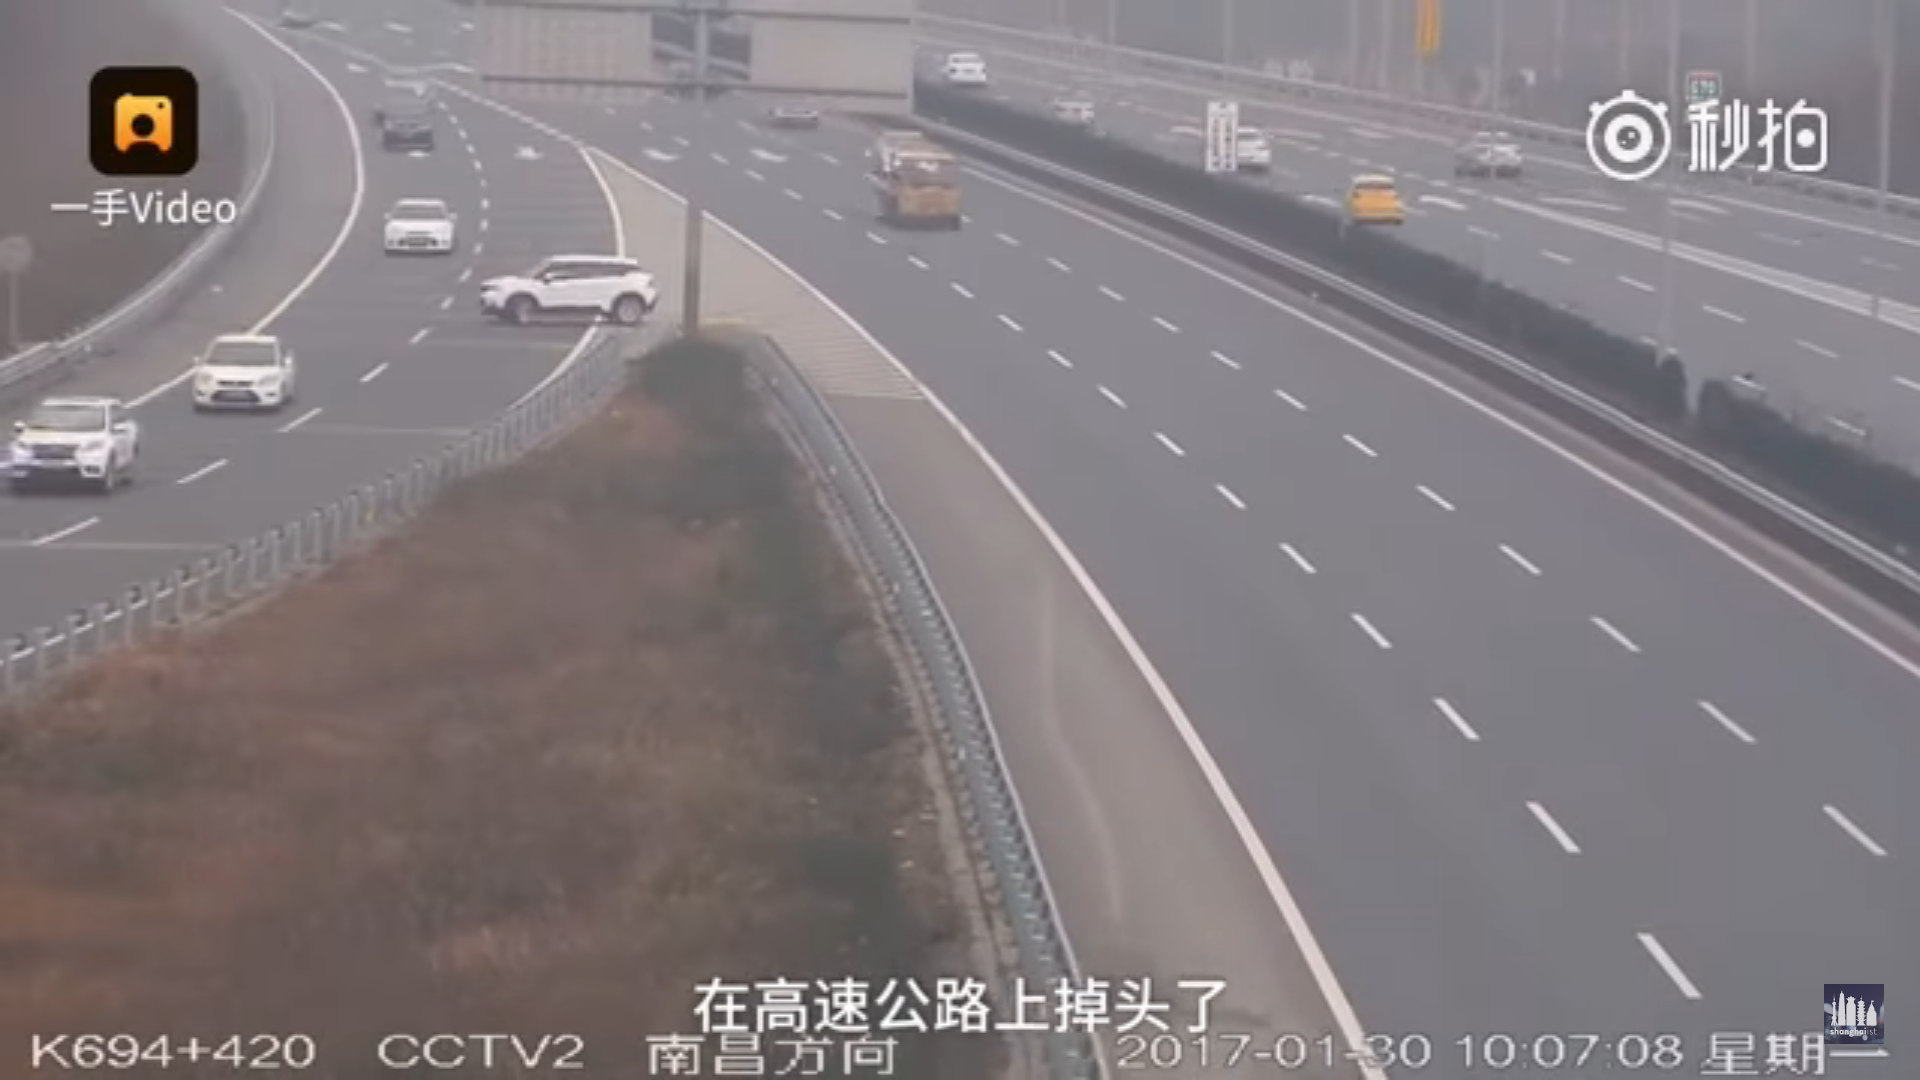 Chinese Drove On The Wrong Side Without Knowing It's Illegal - World Of Buzz 1